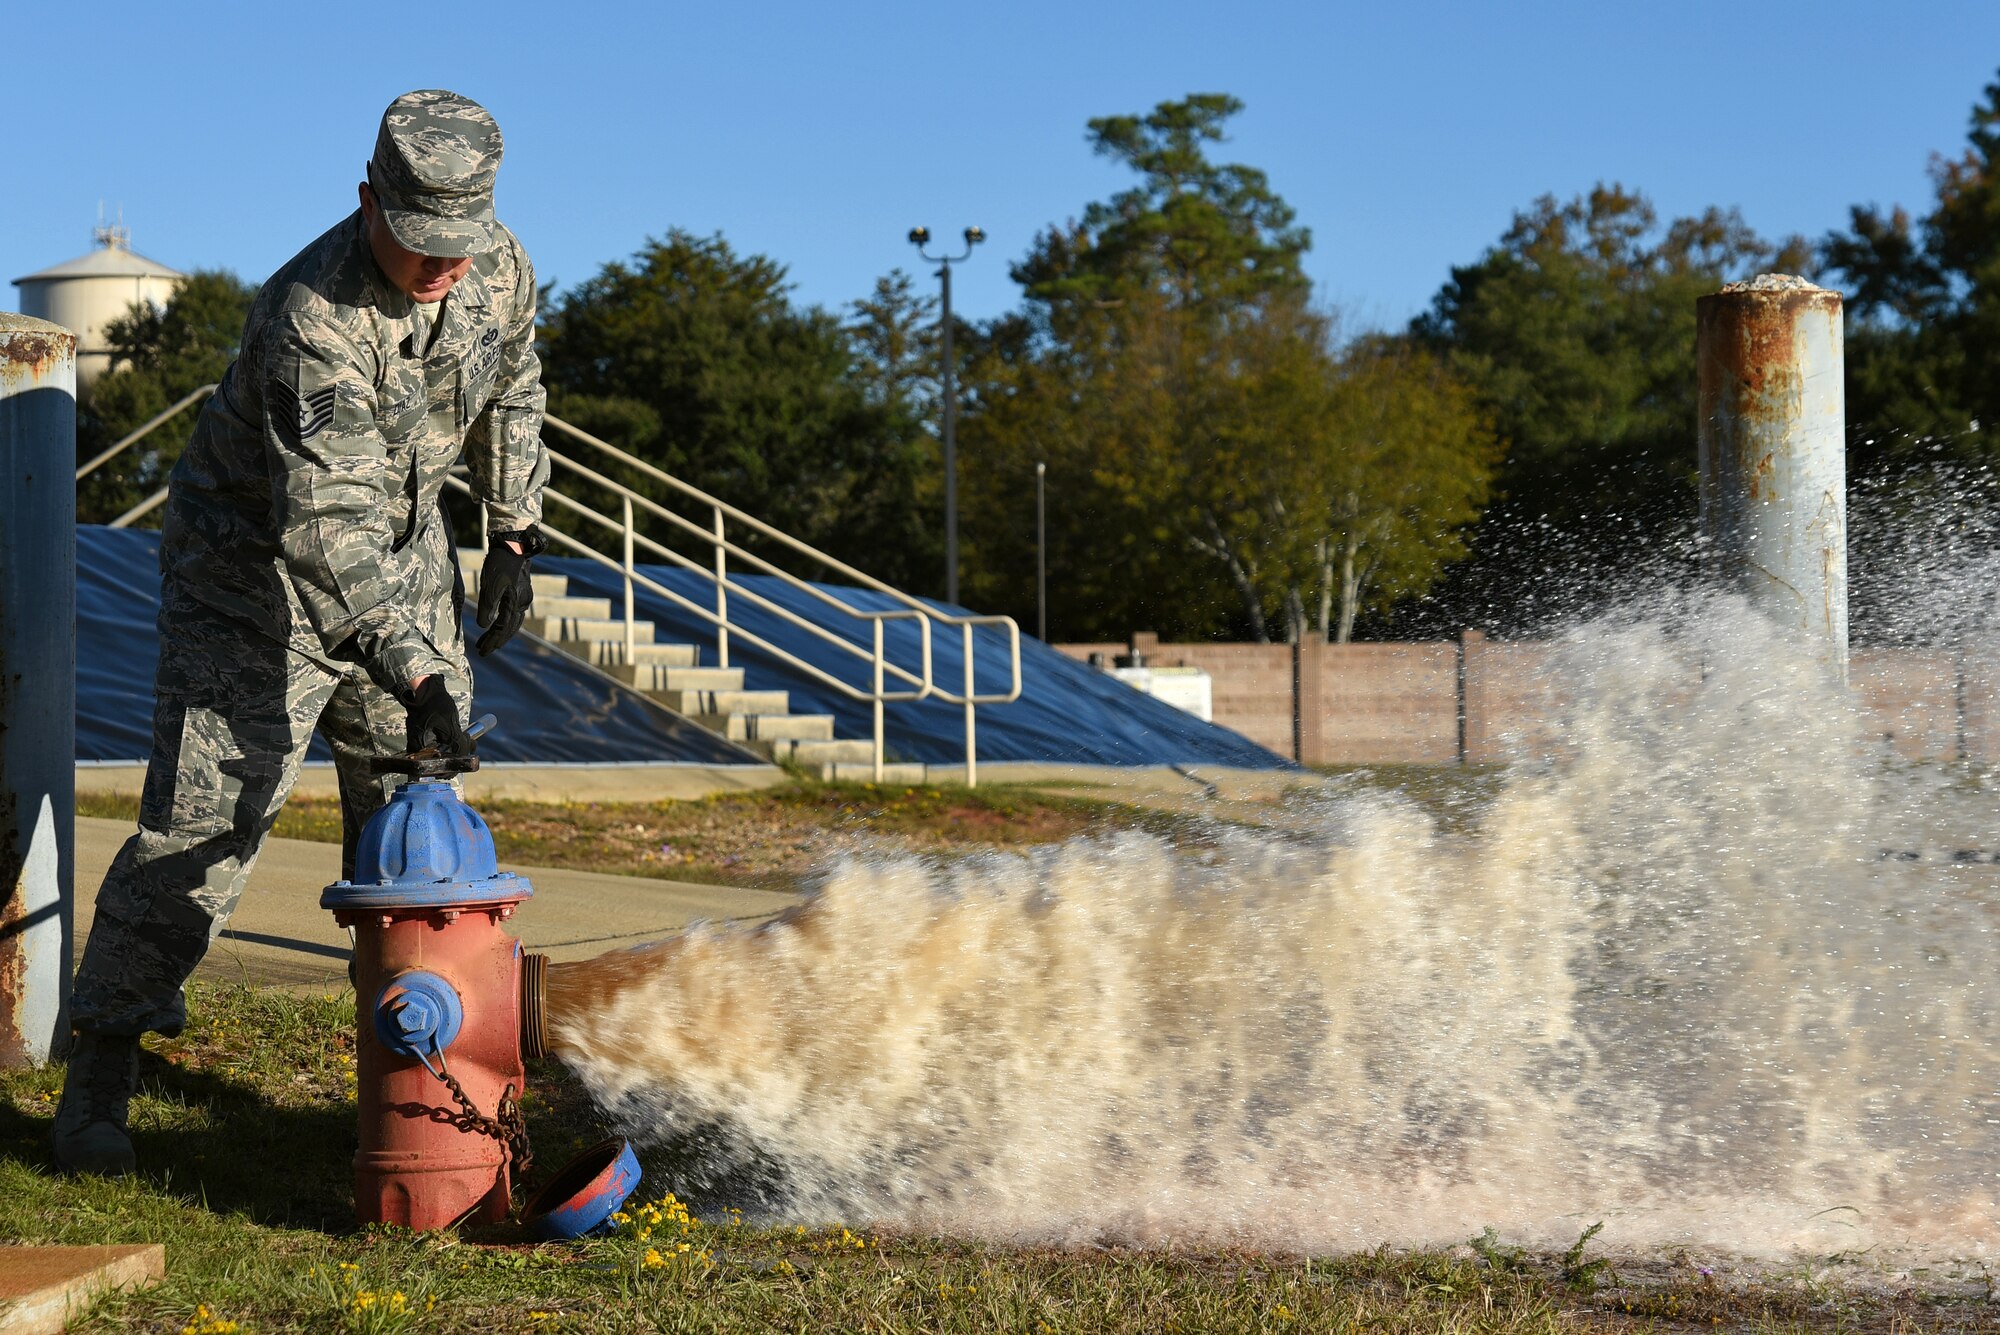 U.S. Air Force Tech. Sgt. Larry Diaz, 20th Civil Engineer Squadron noncommissioned officer in charge of training, opens a fire hydrant at Shaw Air Force Base, South Carolina, Nov. 17, 2017.